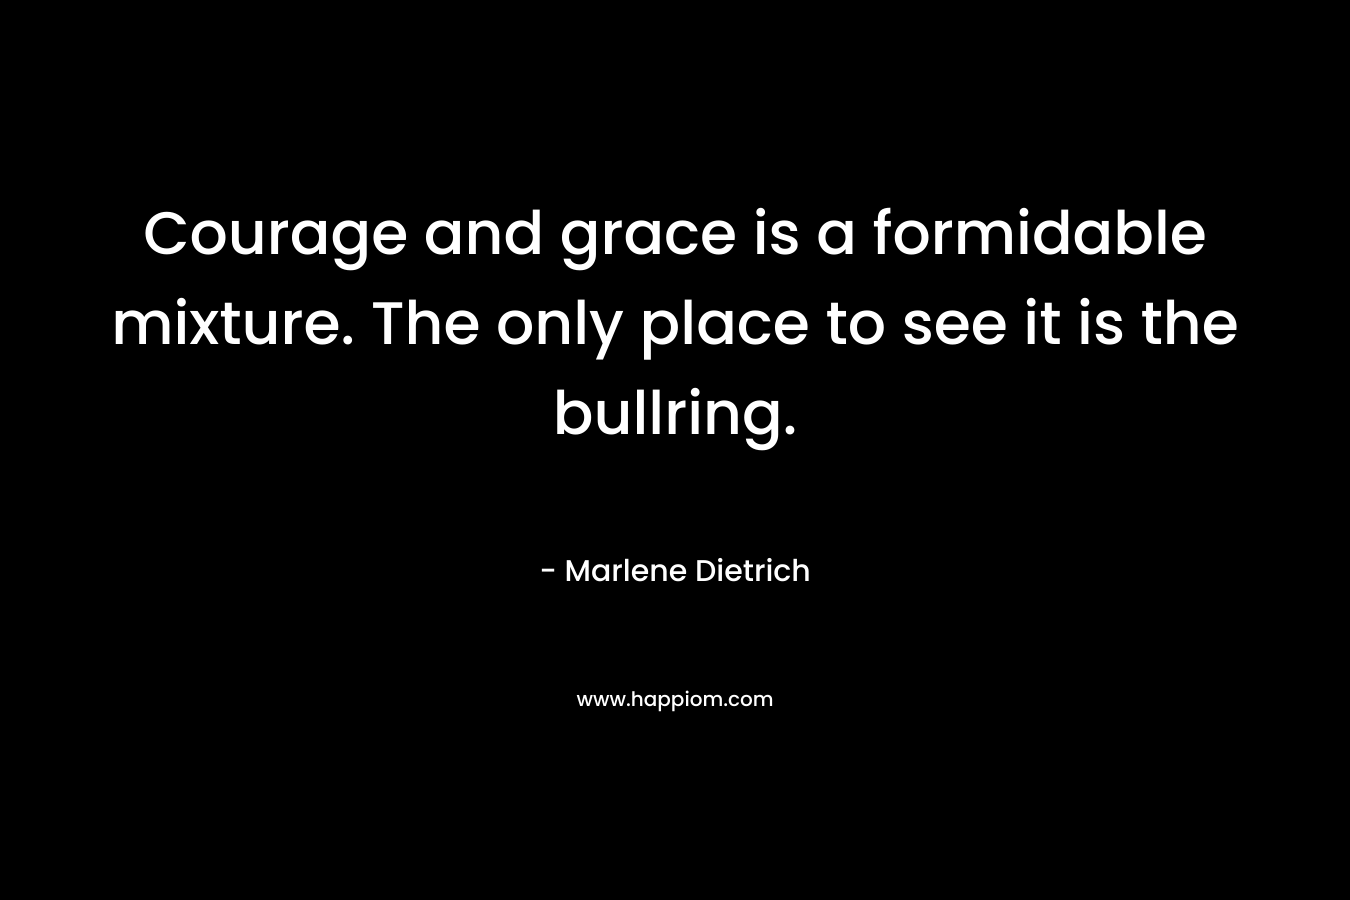 Courage and grace is a formidable mixture. The only place to see it is the bullring.